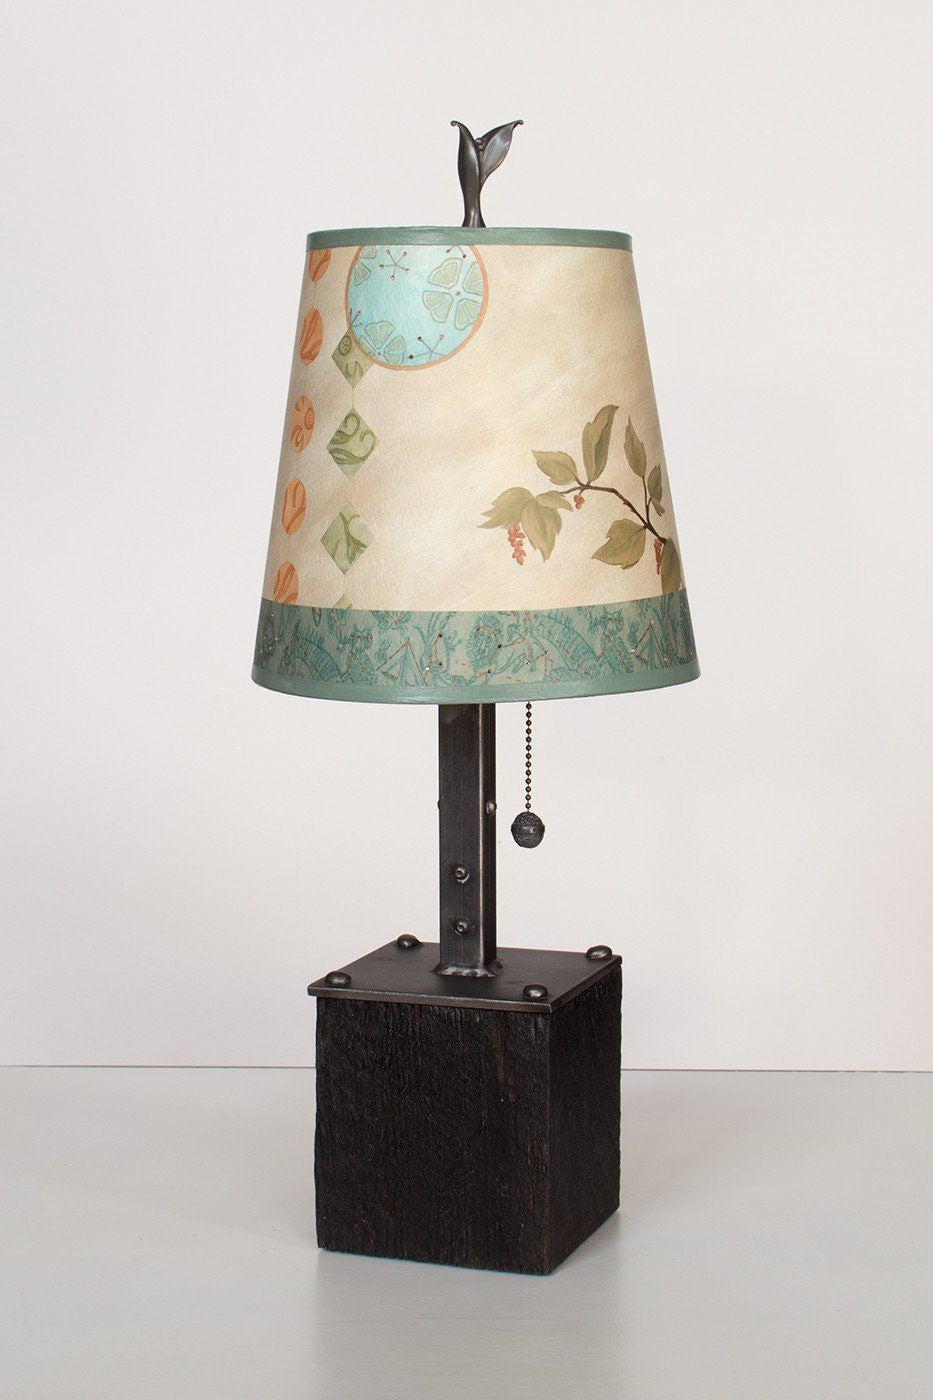 Janna Ugone & Co Table Lamps Steel Table Lamp on Reclaimed Wood with Small Drum Shade in Celestial Leaf